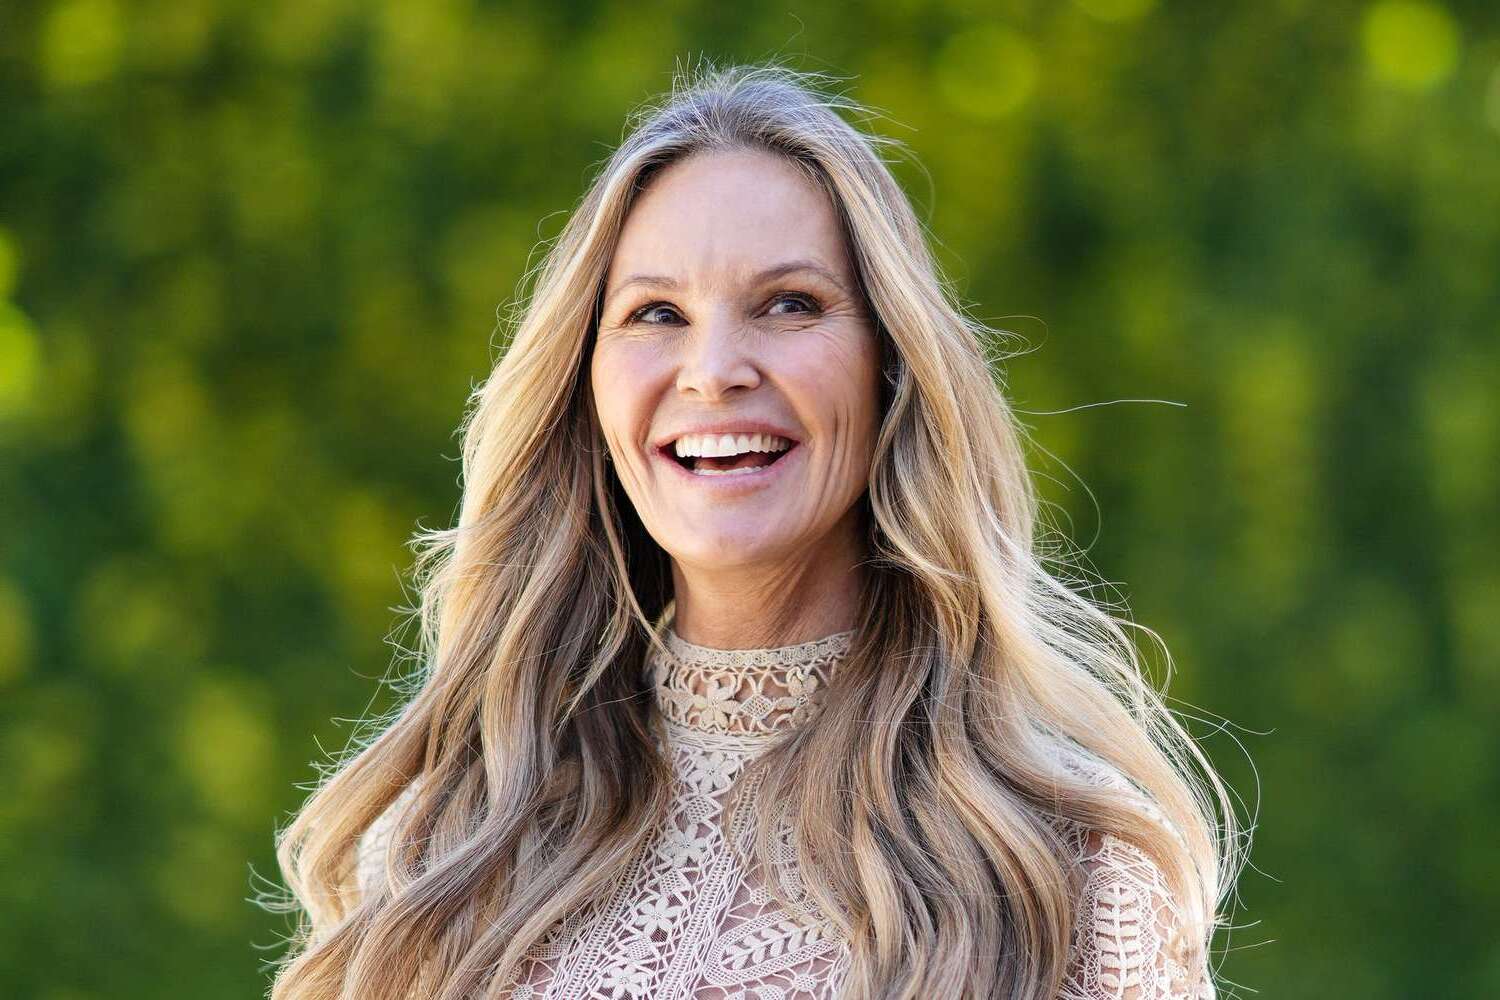 Elle Macpherson’s Secret To Staying Youthful: Going To Bed Nude